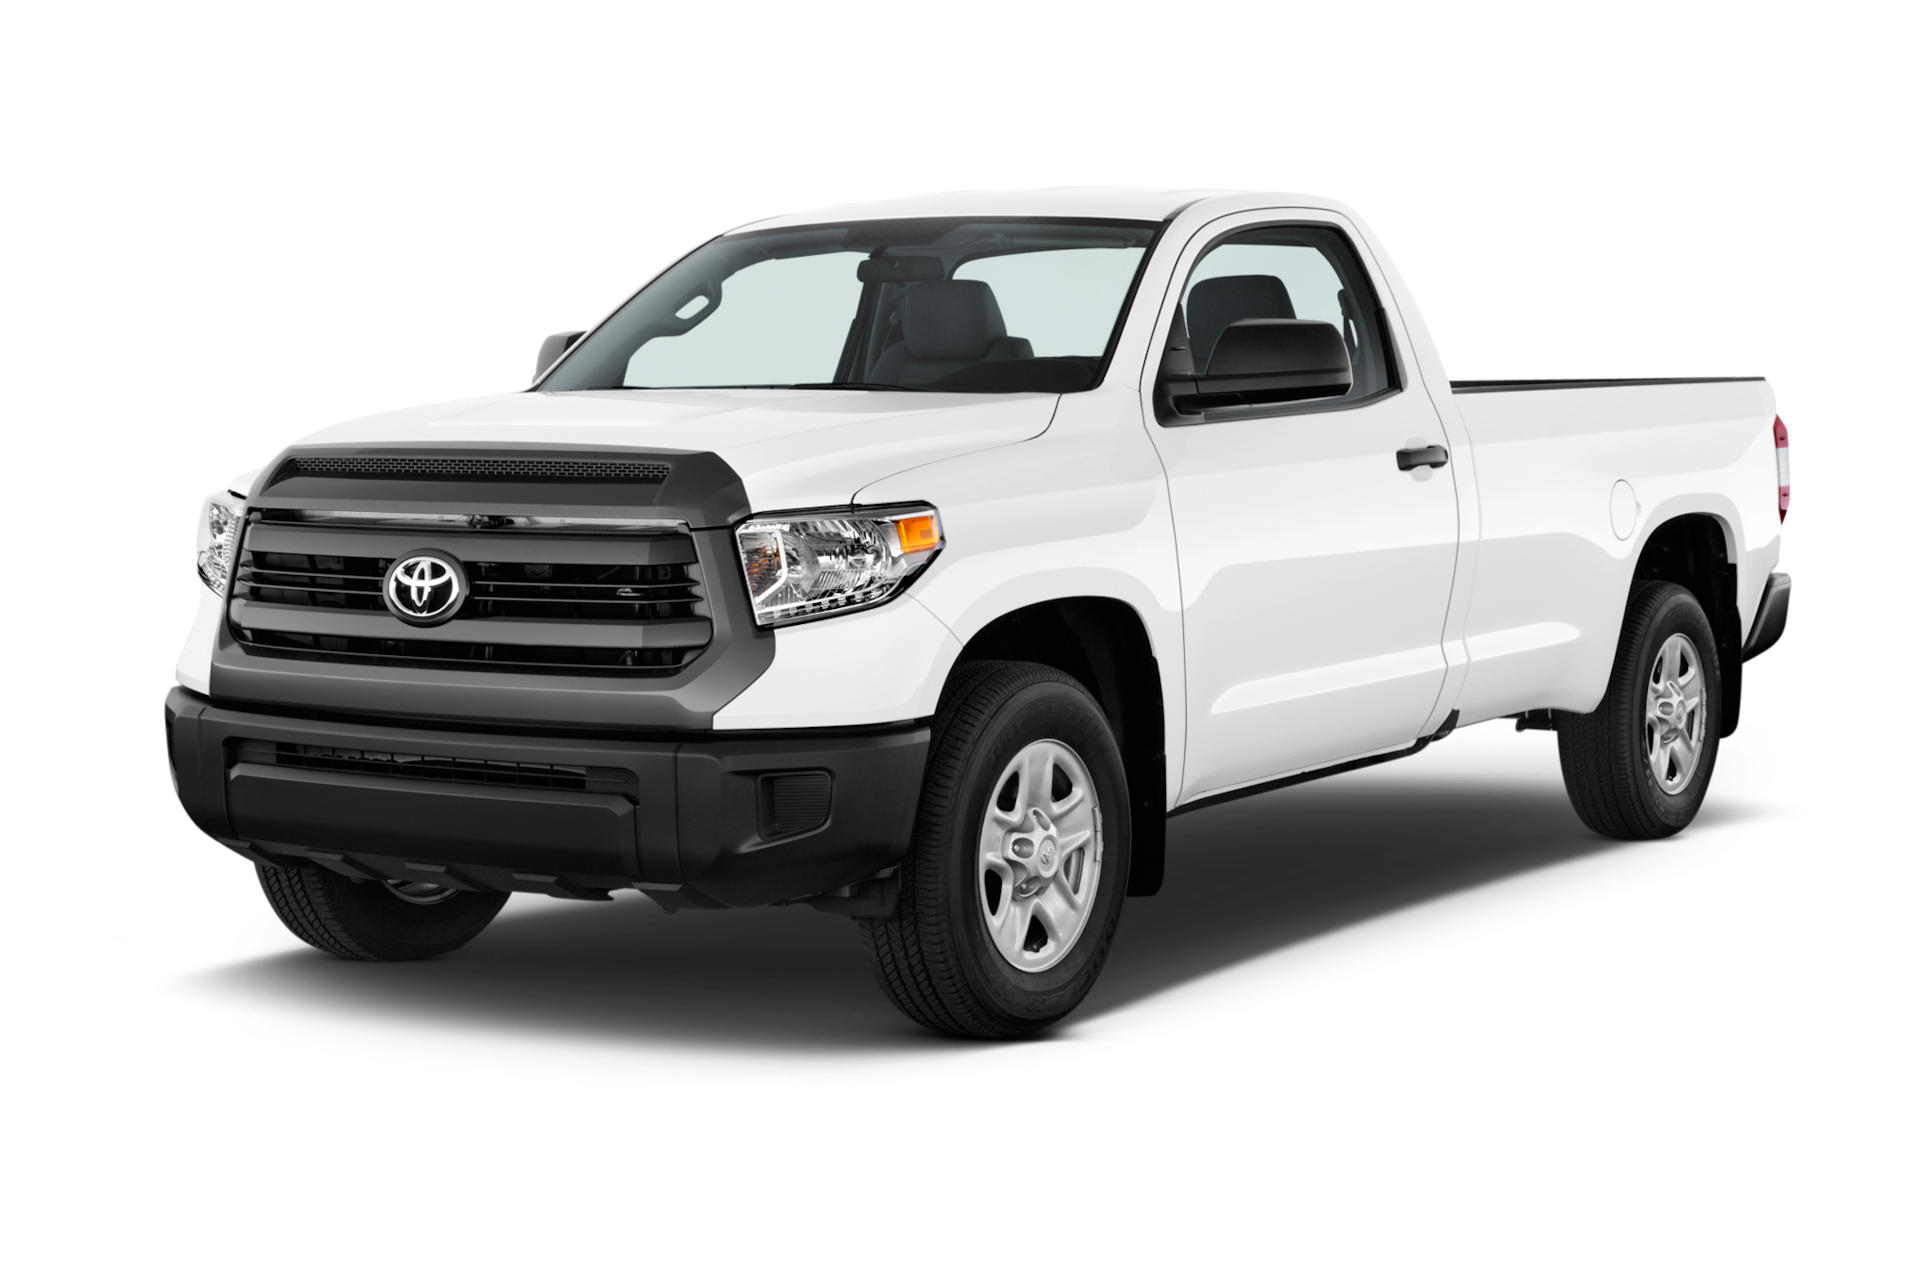 2014 Toyota Tundra Prices, Reviews, and Photos - MotorTrend